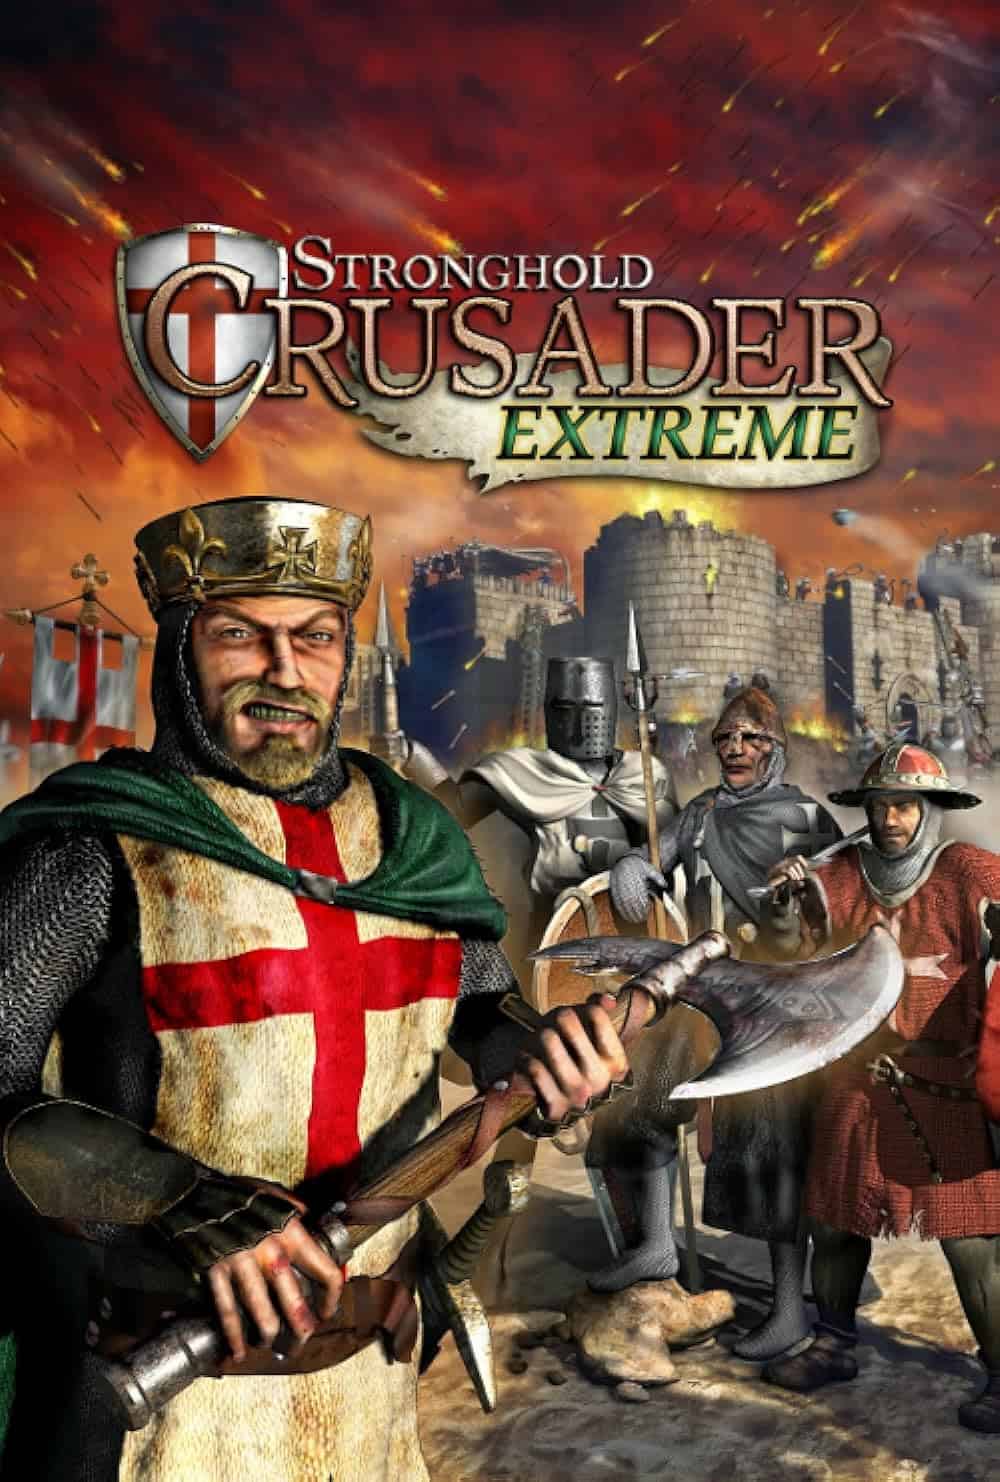 Stronghold Extreme cover art